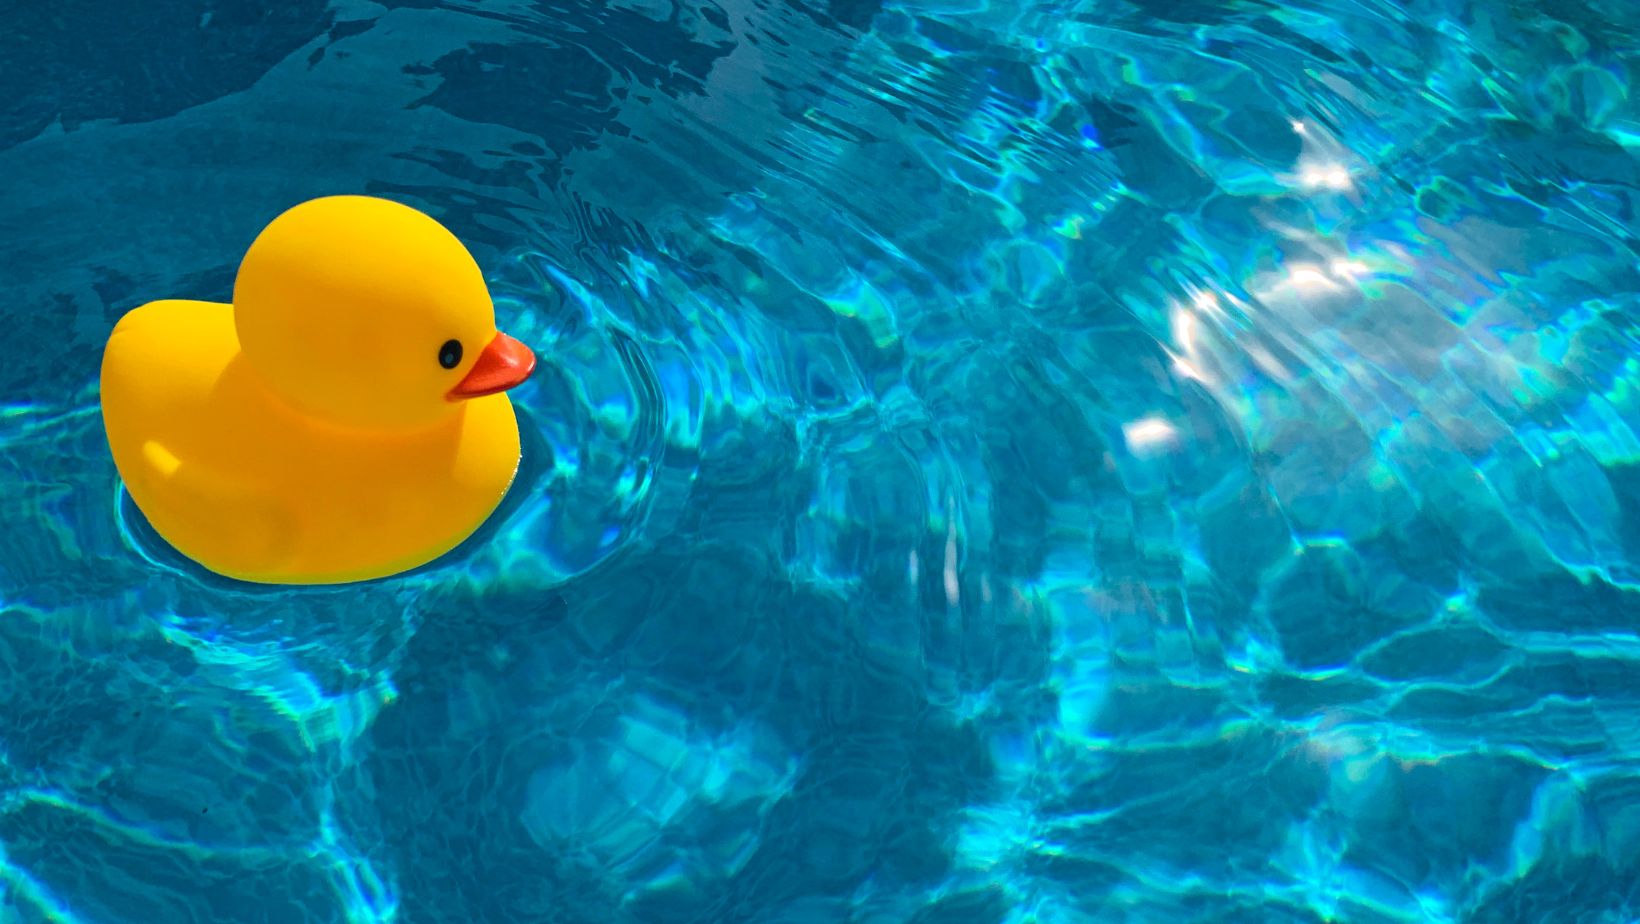 Various Uses of Rubber Ducks Related to Kids